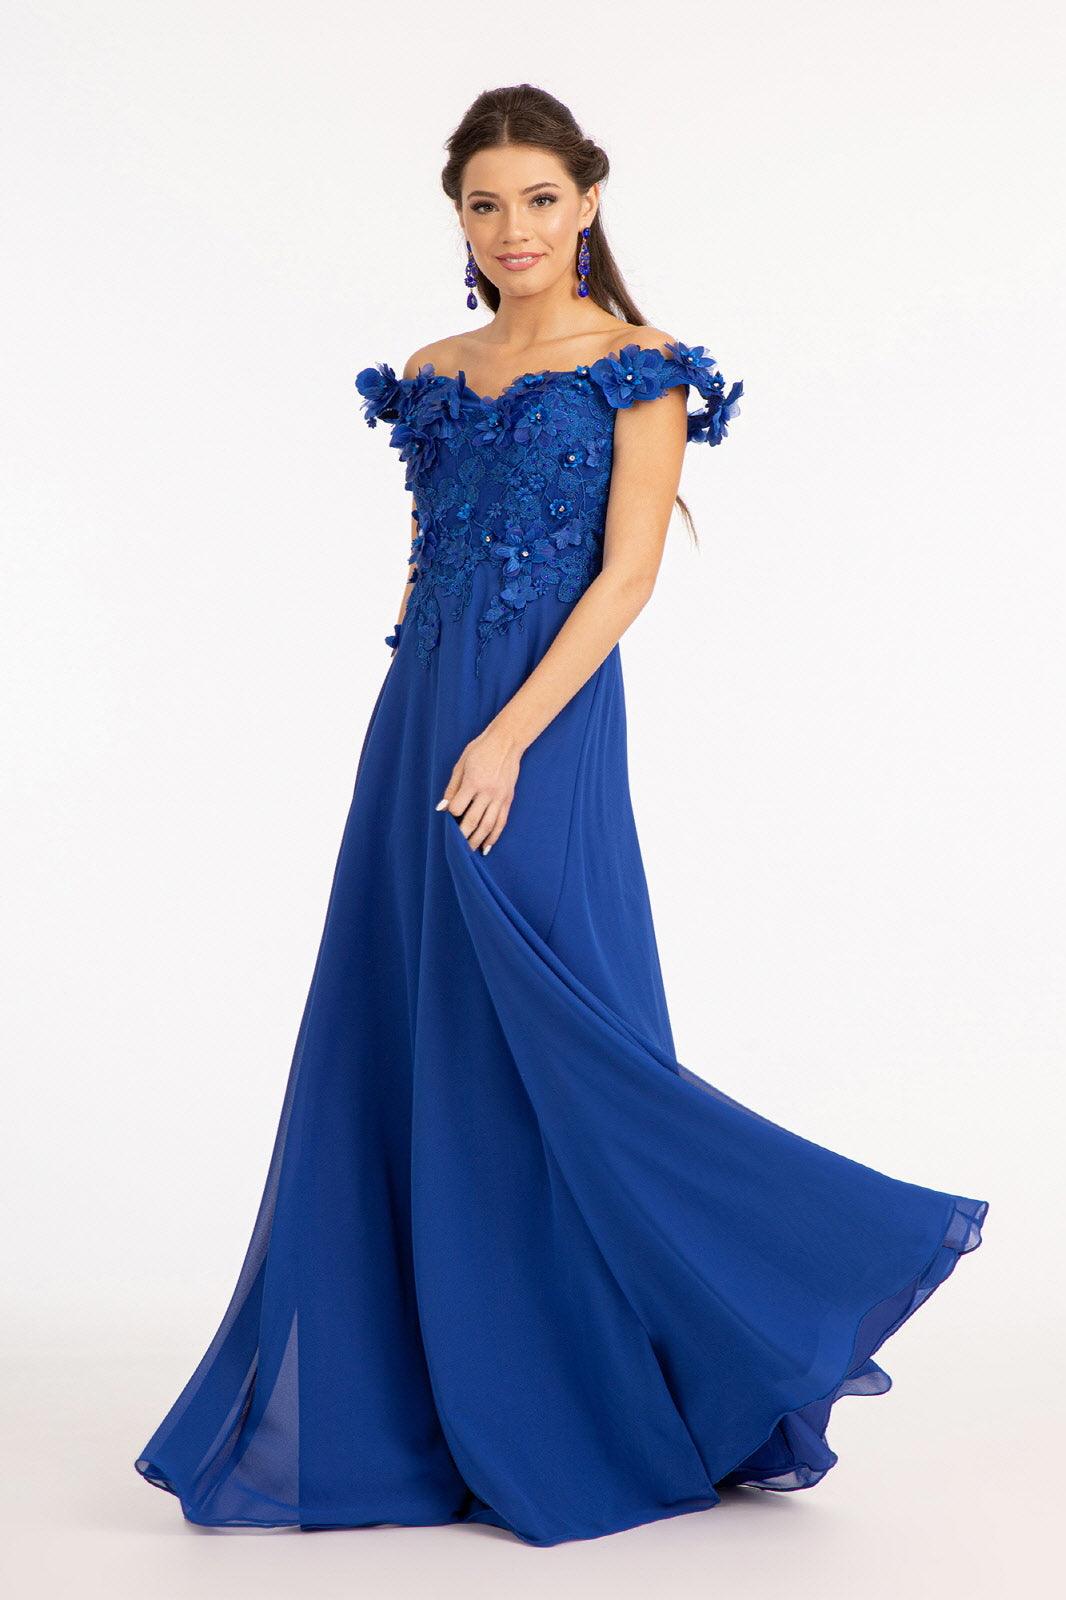 Long Off Shoulder Formal Chiffon Prom Gown Royal